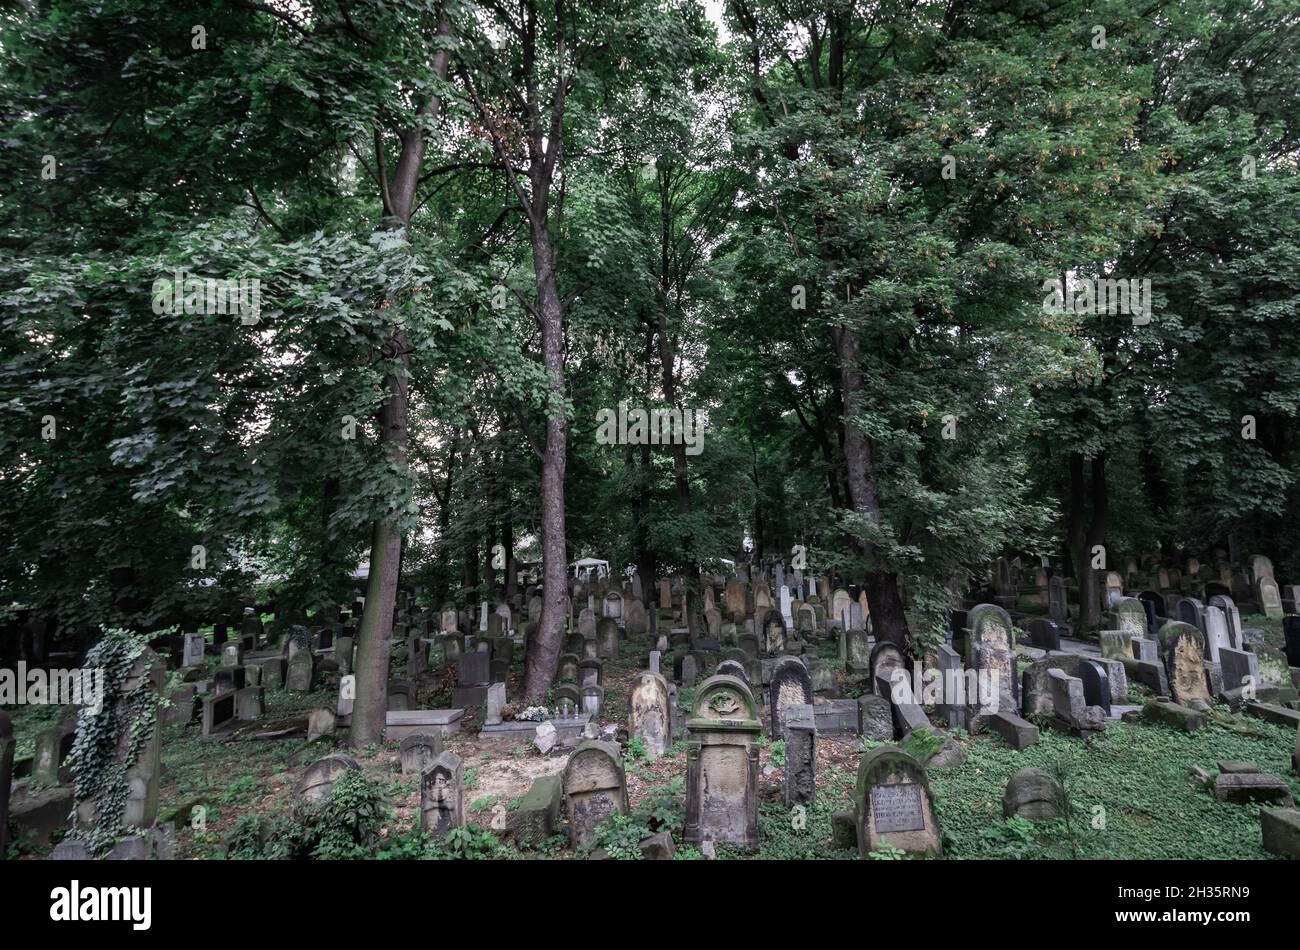 krakow-Poland. 03-09-2021. A view from above of the gravestones in the new Jewish cemetery in Krakow, Poland Stock Photo